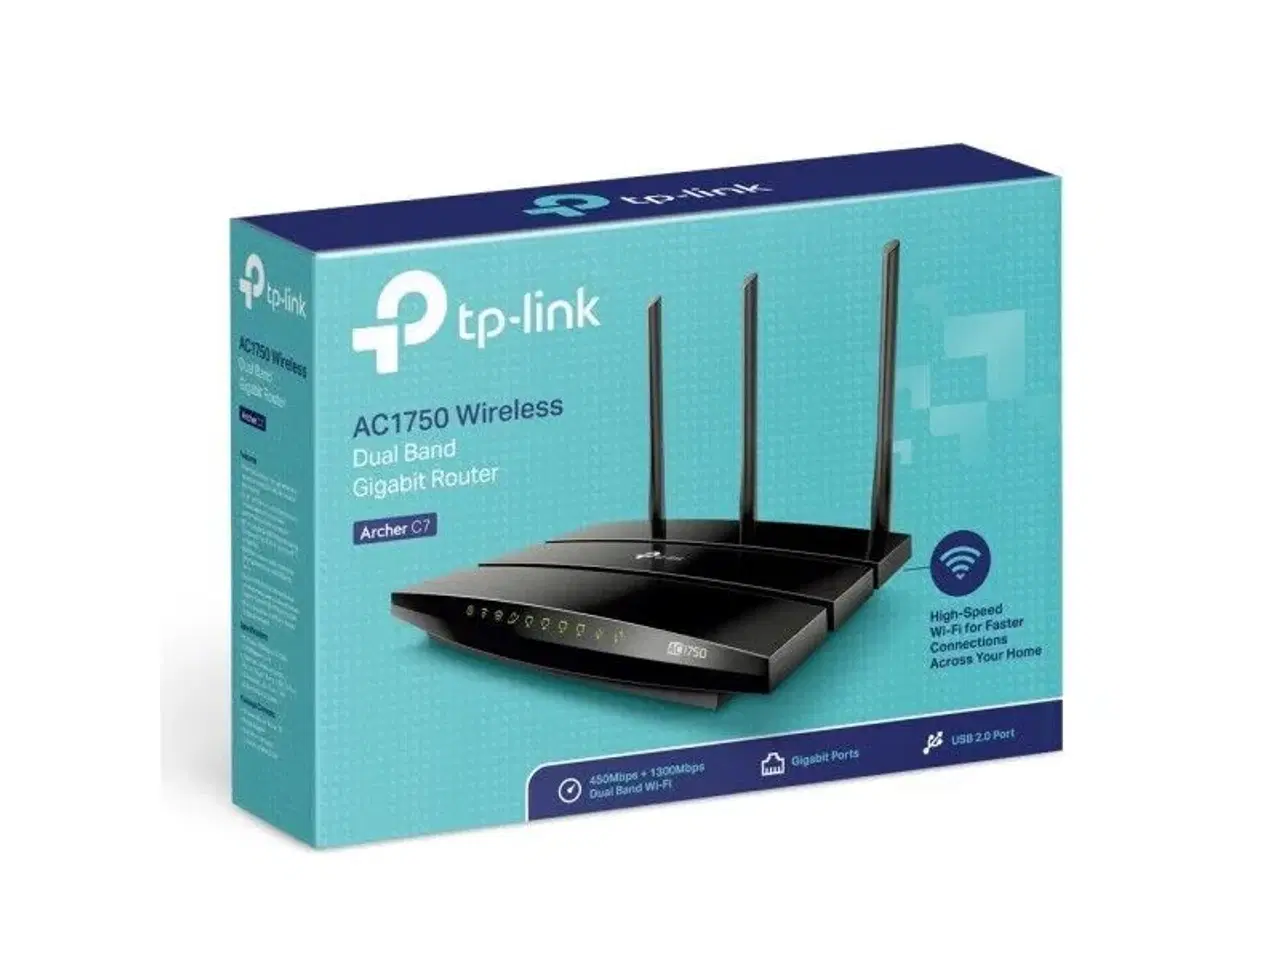 Billede 1 - TP-LINK AC1750 Dual Band Wi-Fi Router